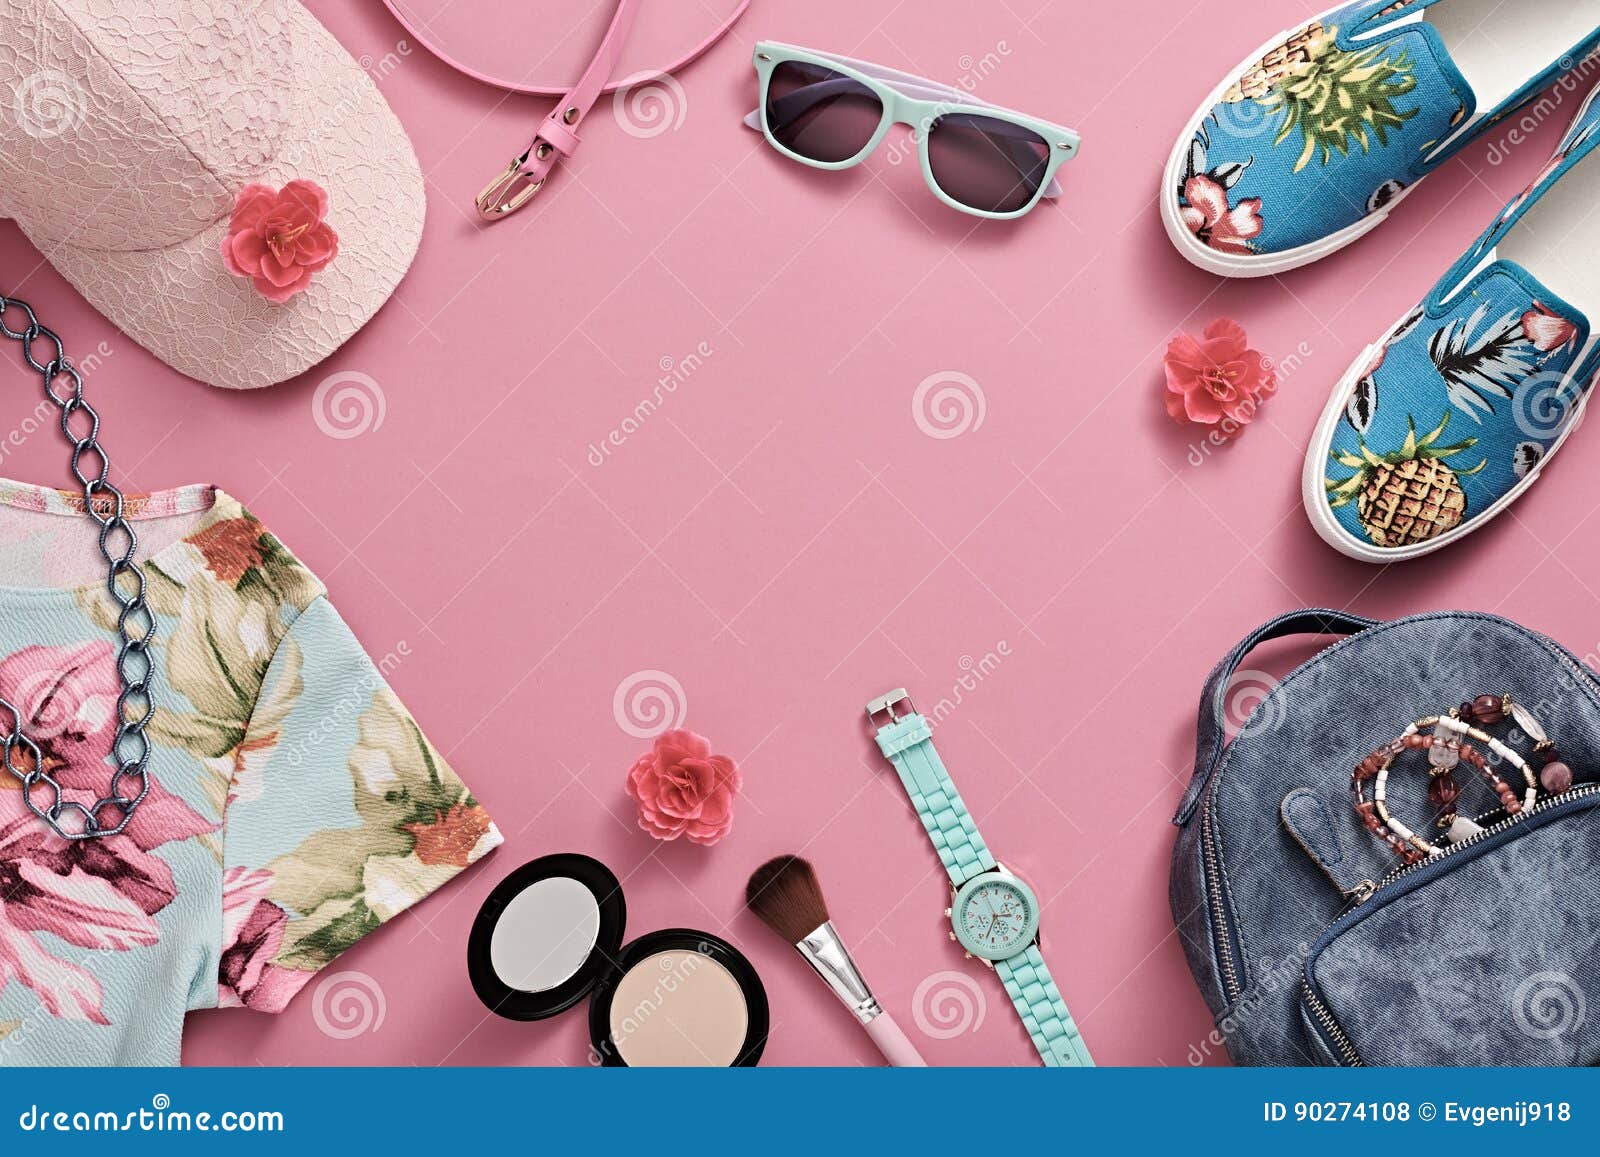 Fashion Design Hipster Accessories. Urban Outfit Stock Photo - Image of ...